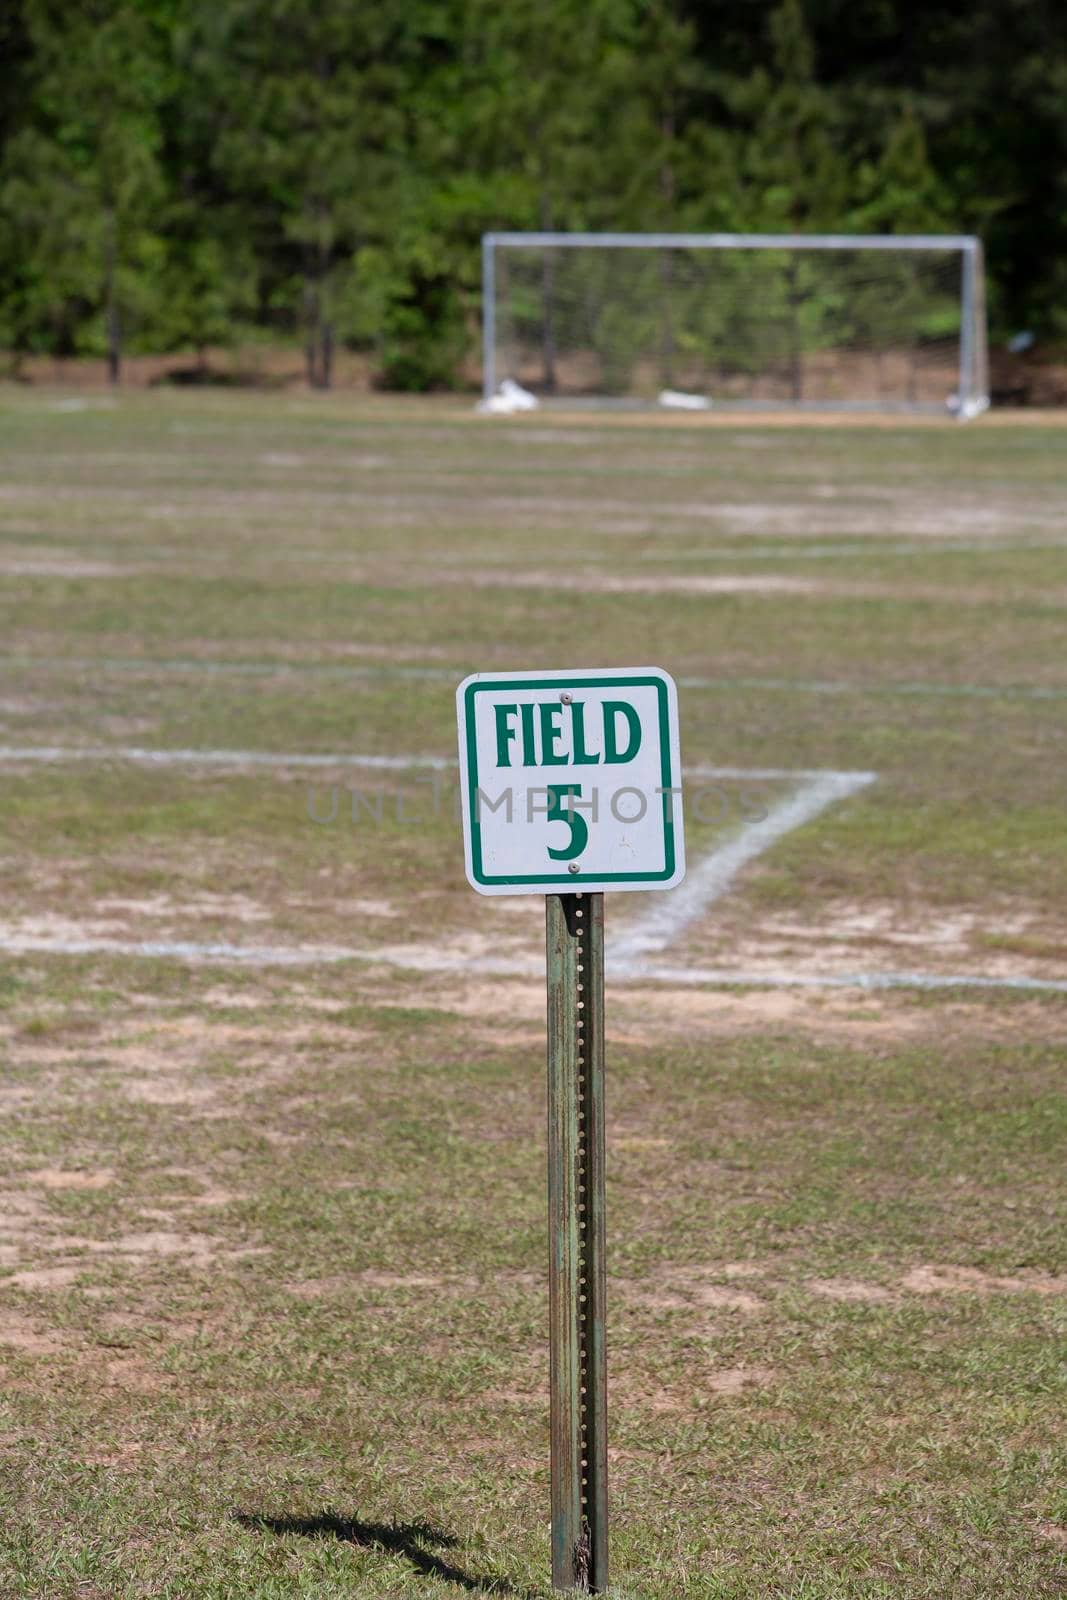 Field number sign with a soccer goal in the background